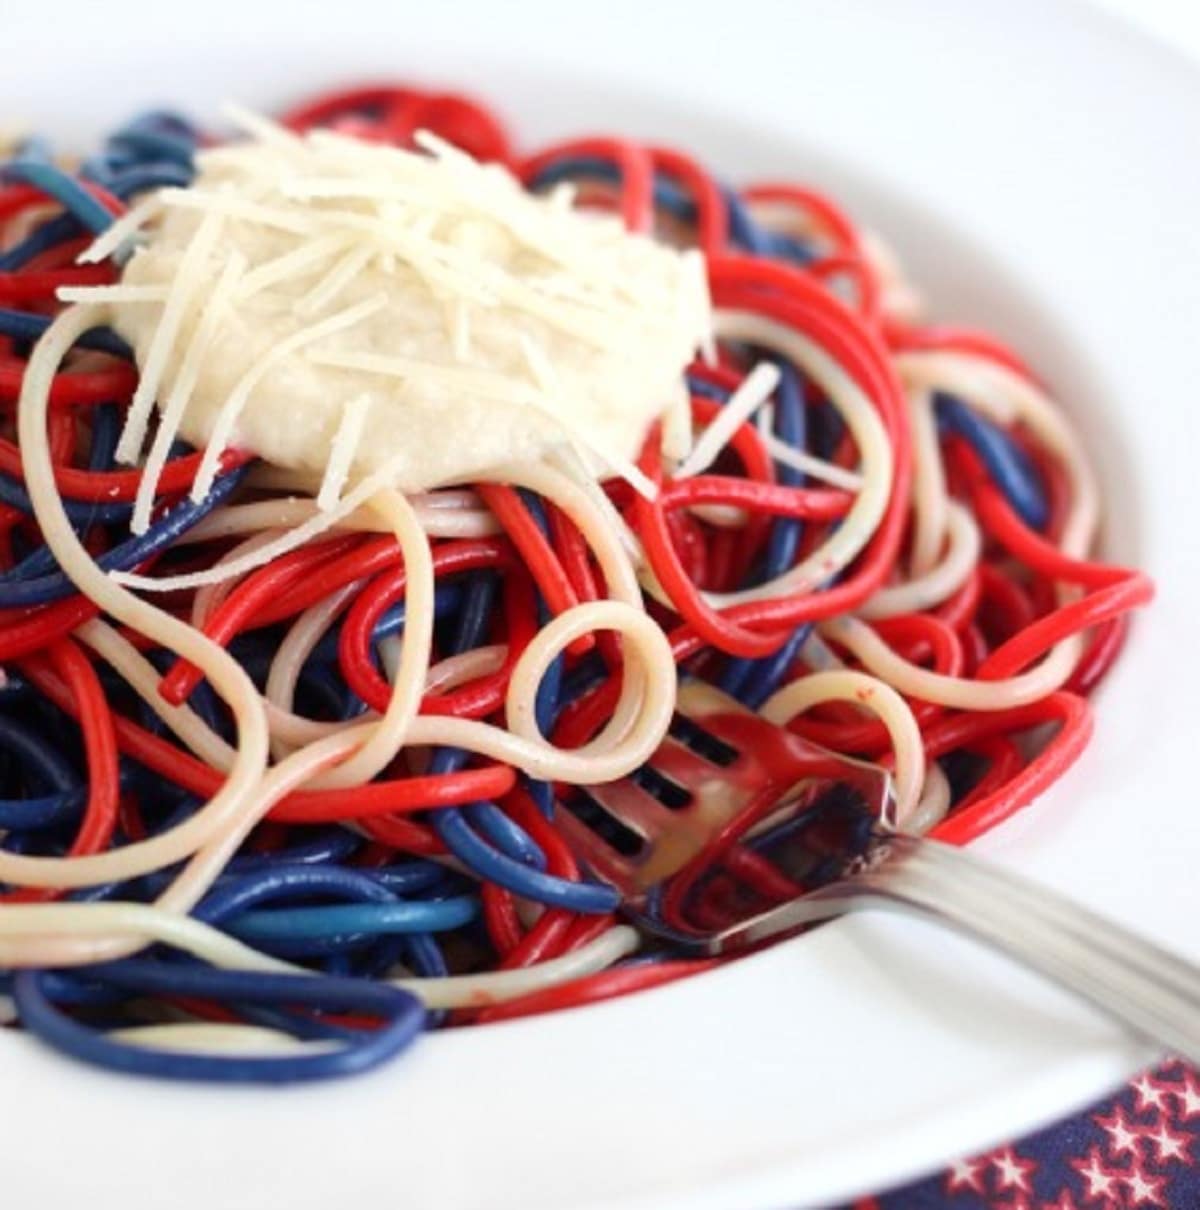 Noodles dyed red and blue topped with dollop of cheese in white bowl